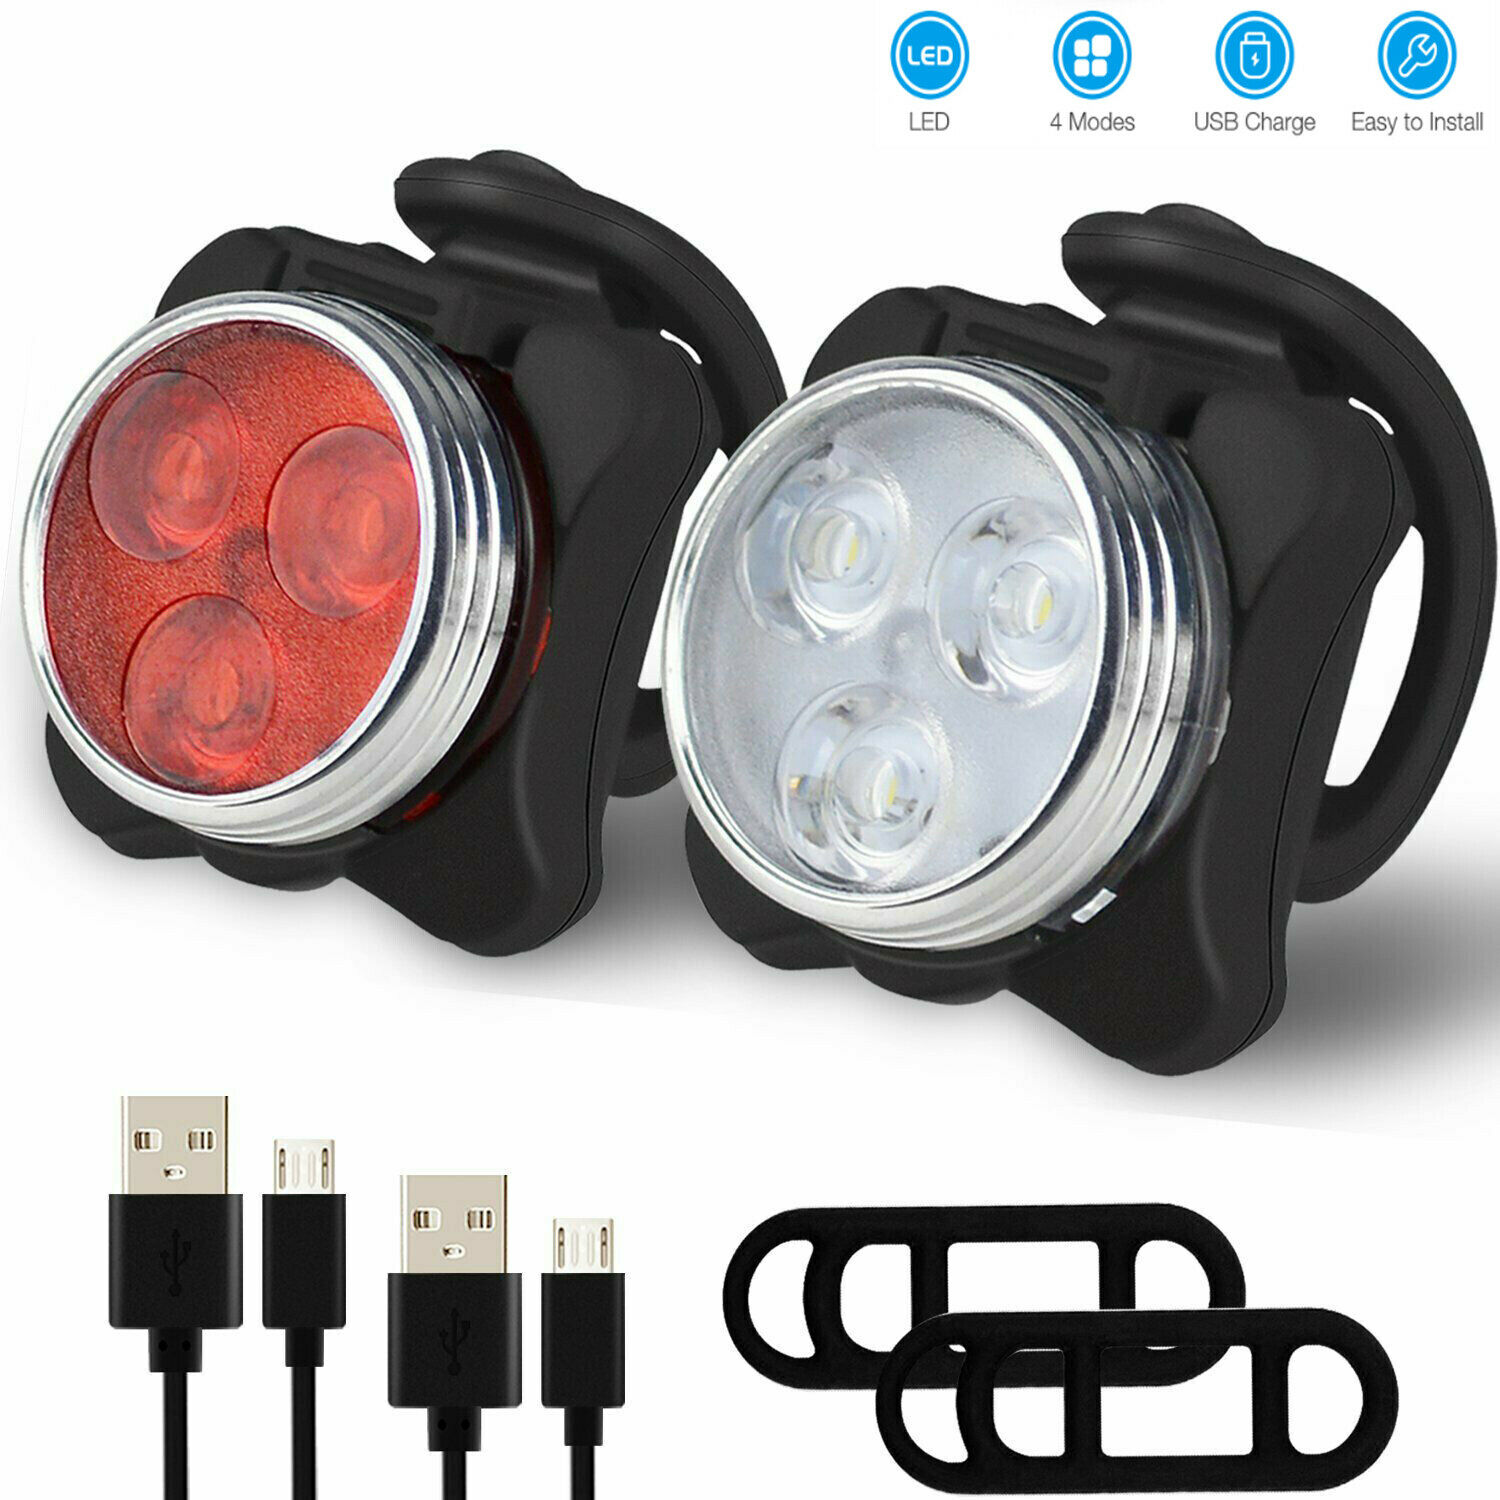 2×usb Rechargeable Led Bike Lights Set Headlight Taillight Caution Bicycle Light